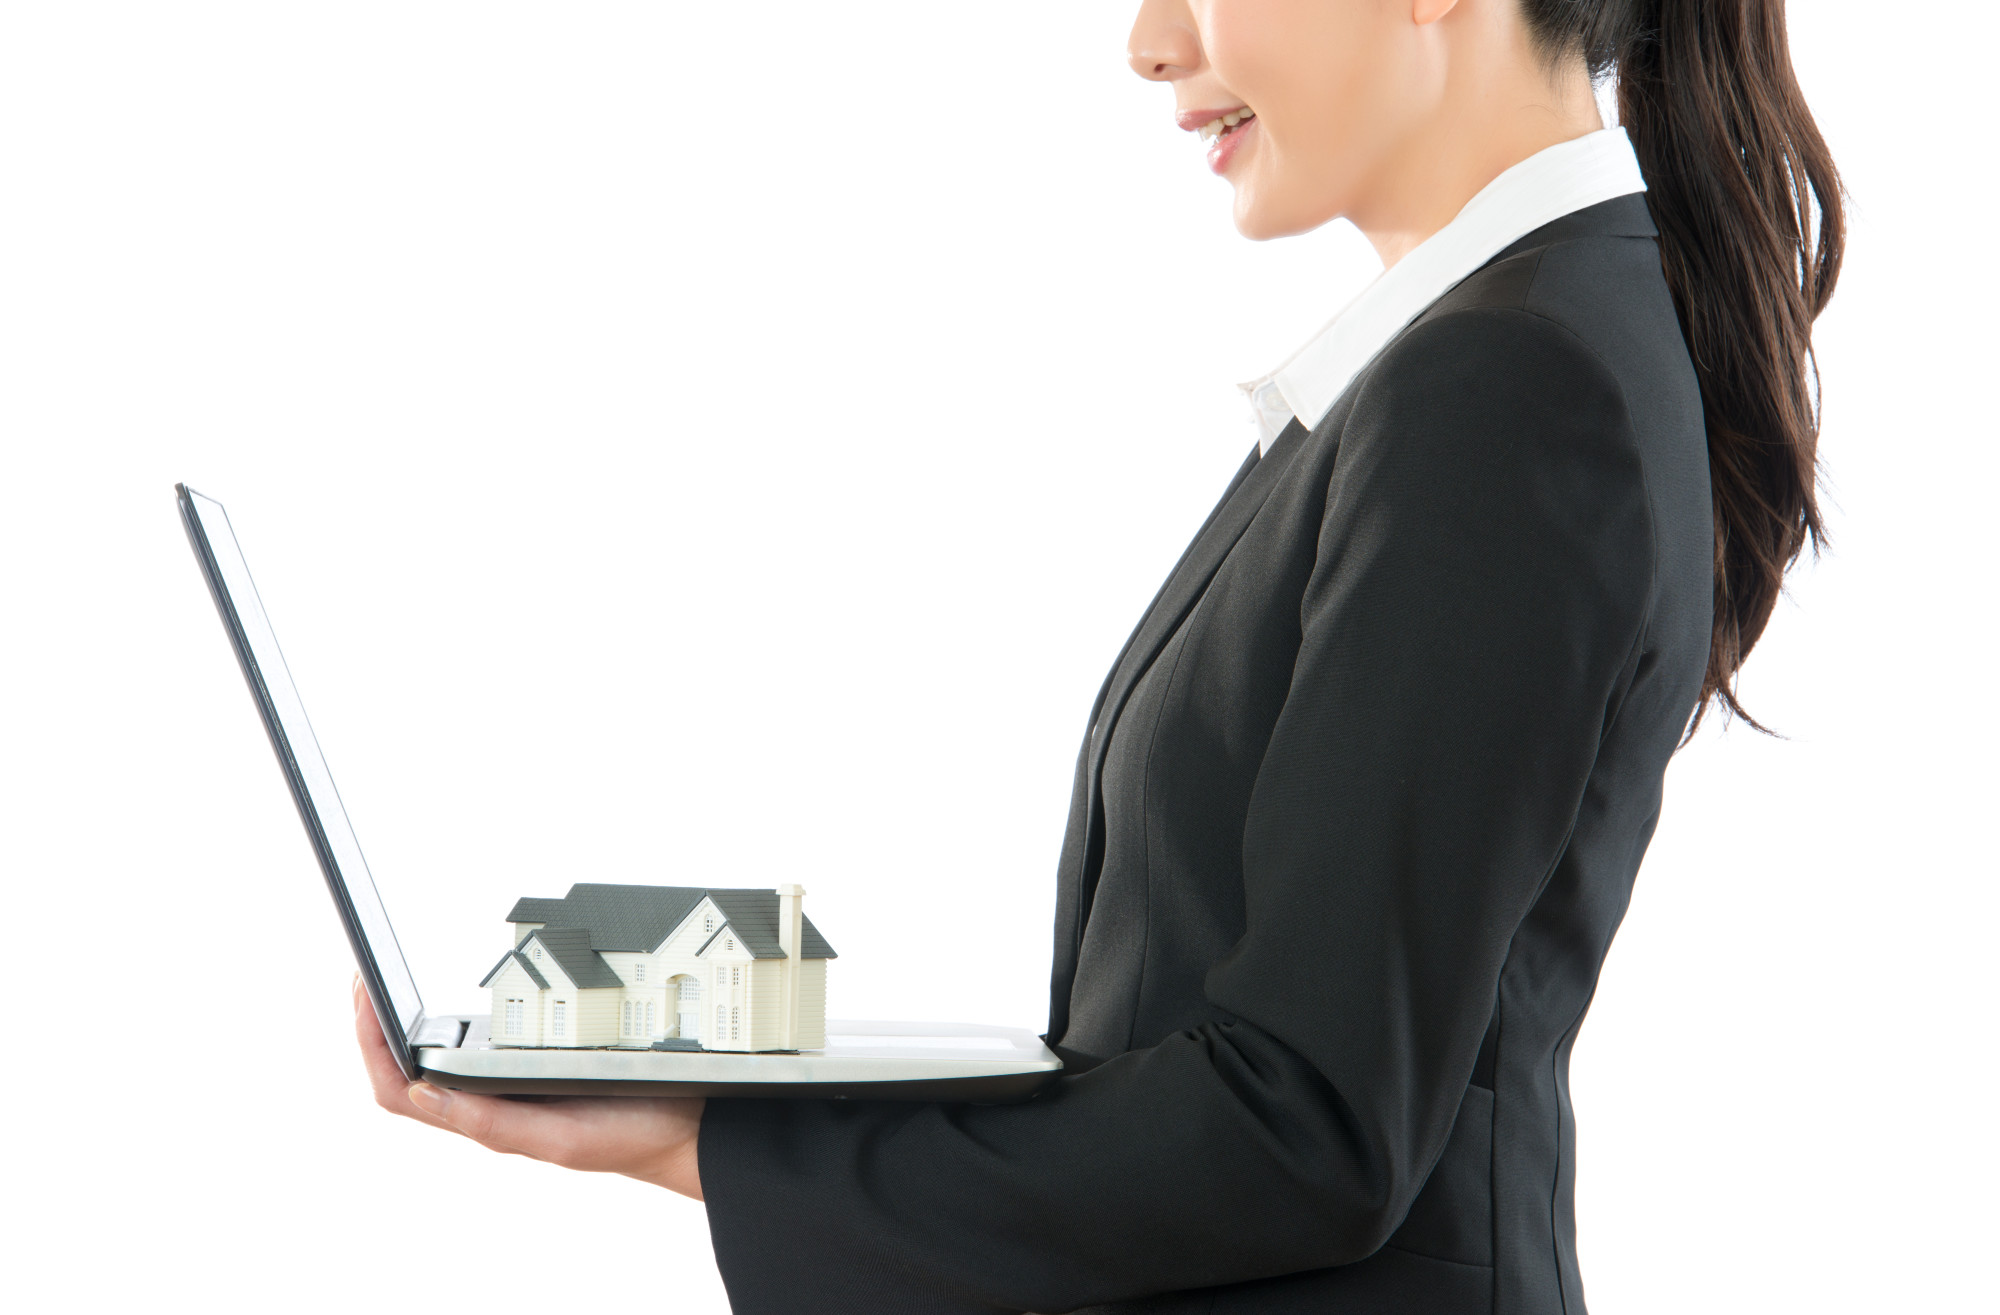 5 Things to Consider When Hiring a Property Manager in Tulsa